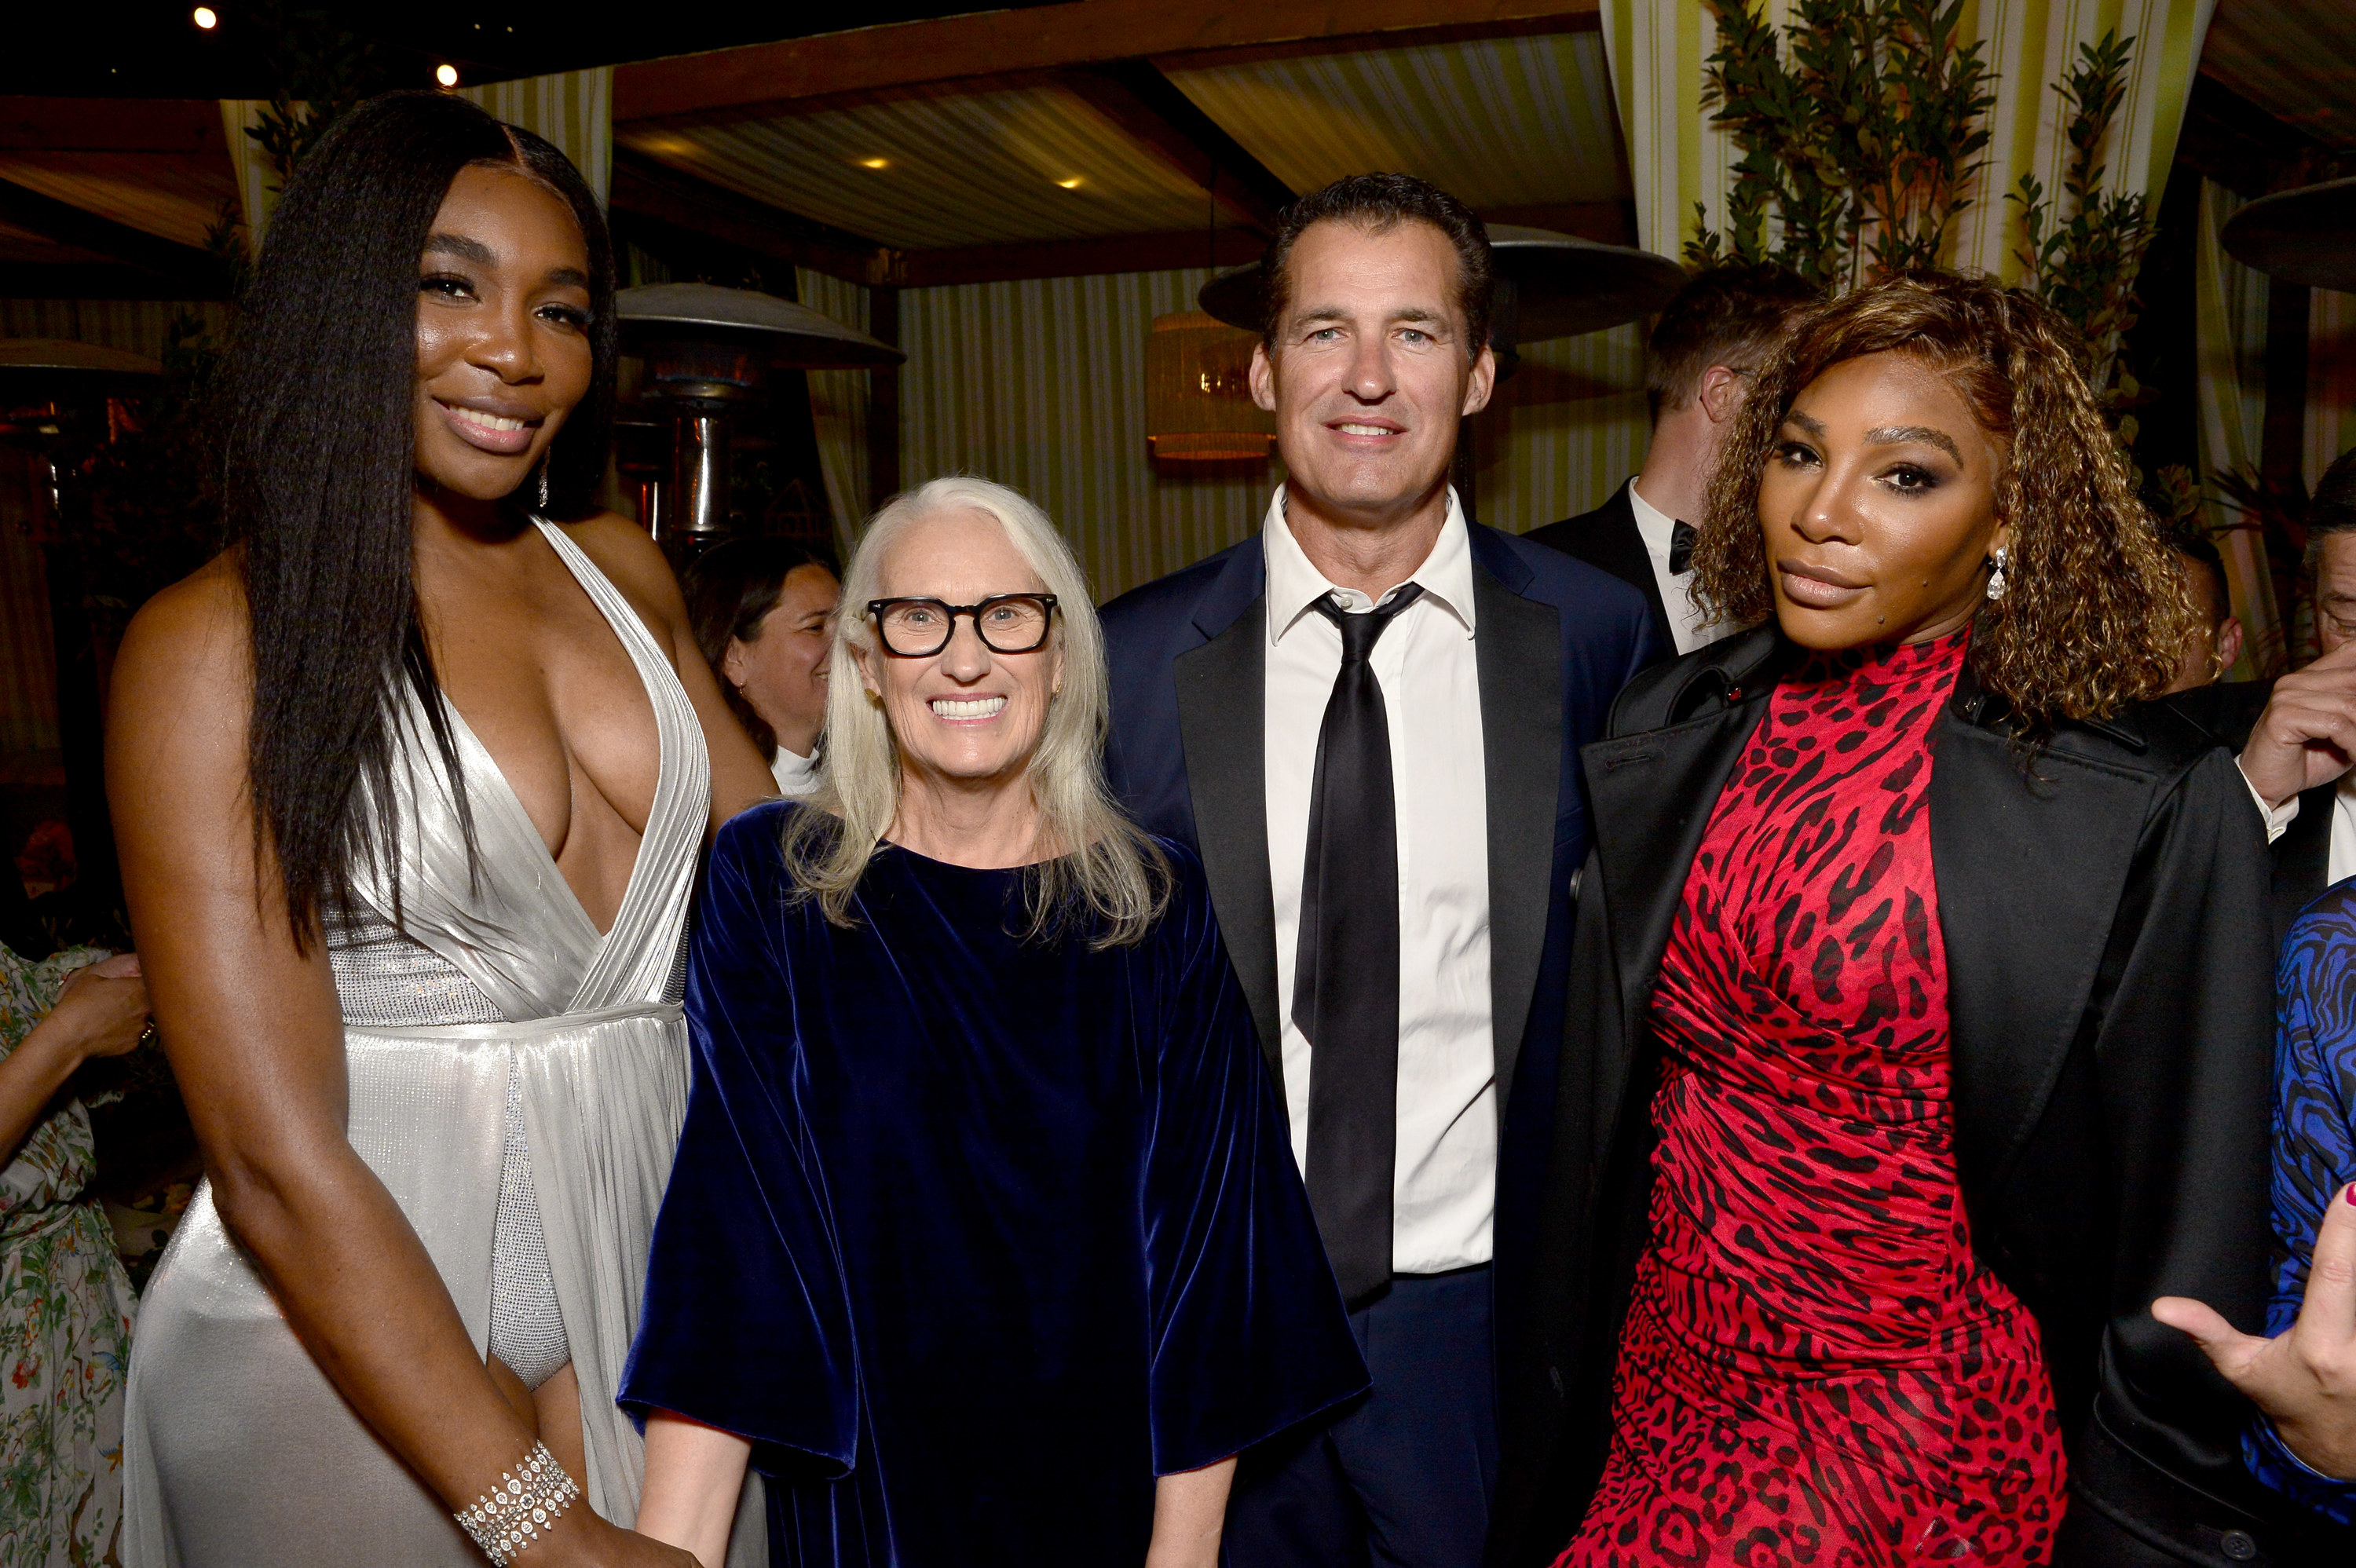 Venus and Serena Williams pose for a picture with Jane Campion